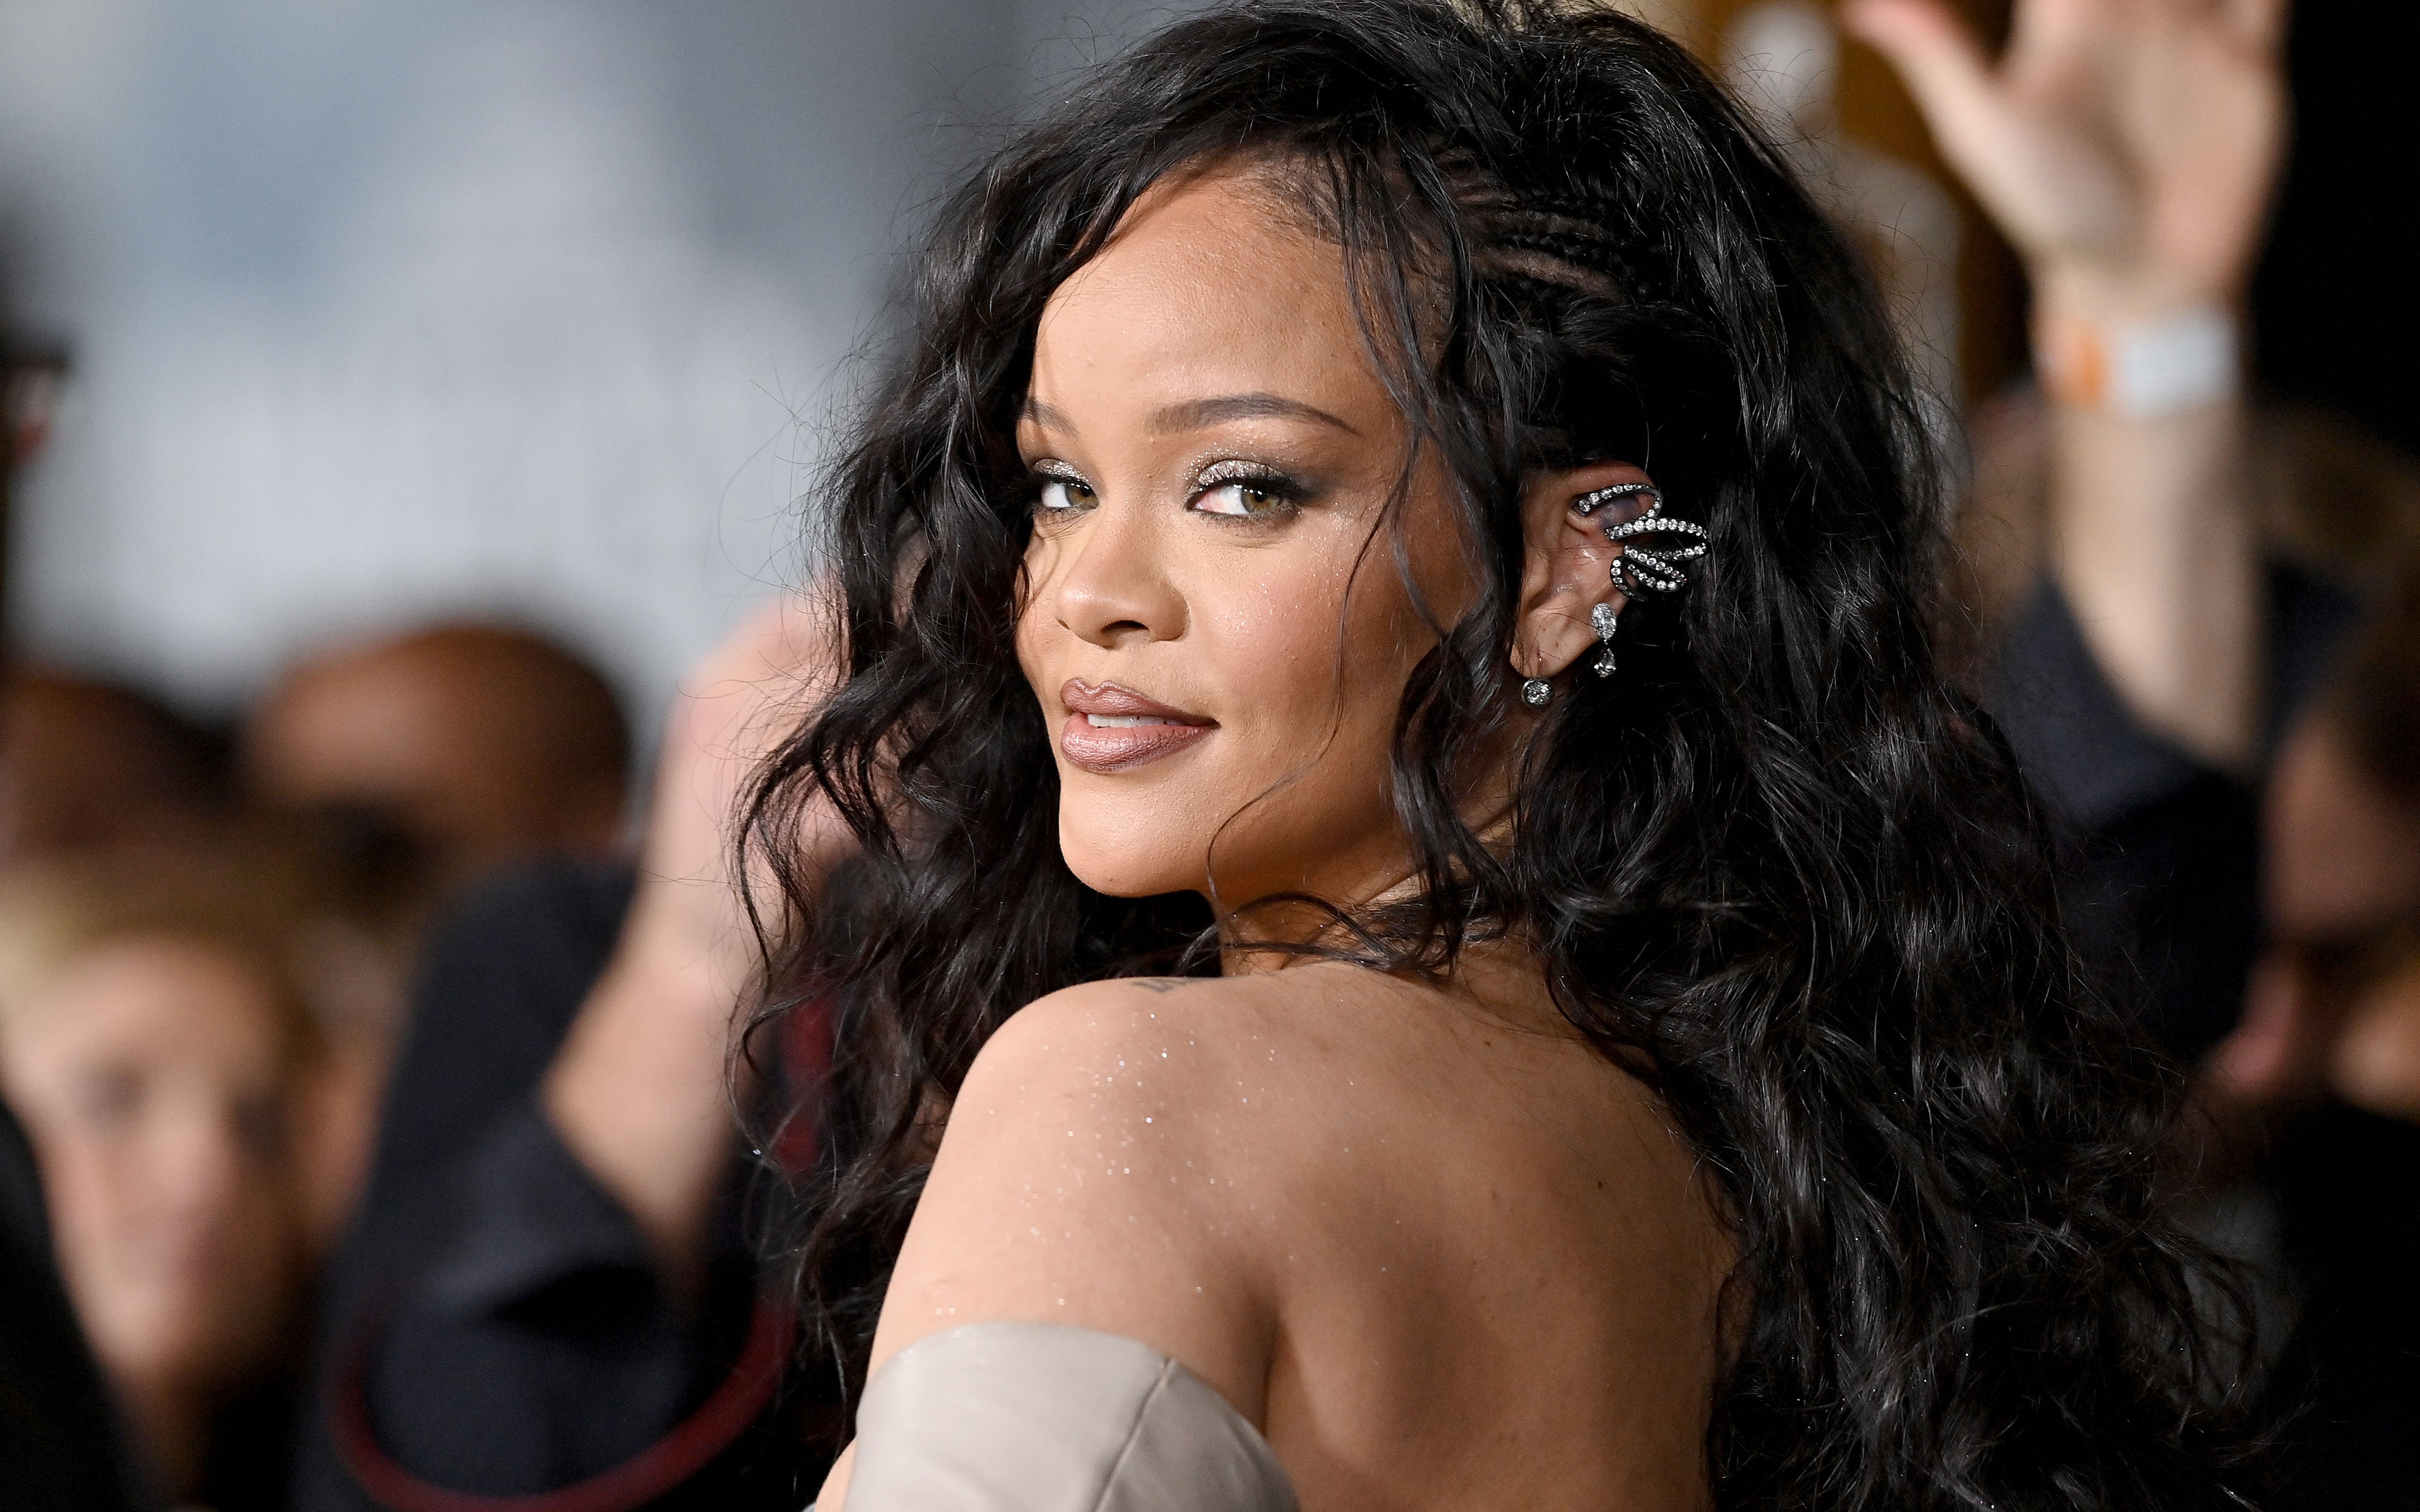 Rihanna Beauty: What Rihanna Has Taught Us About Glam